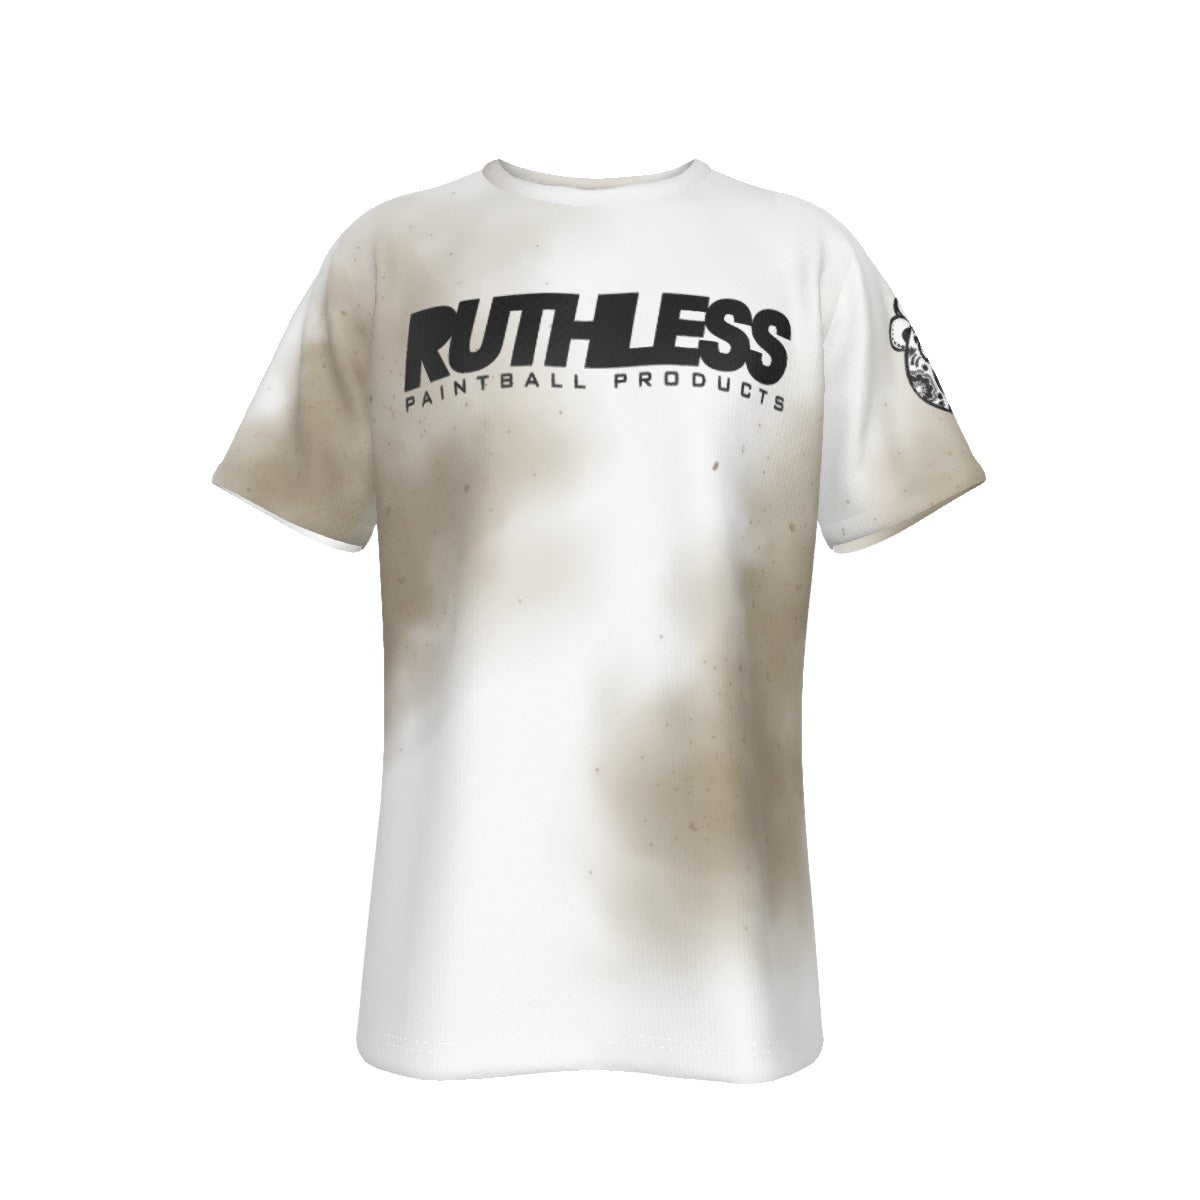 Ruthless Dirty White Tee